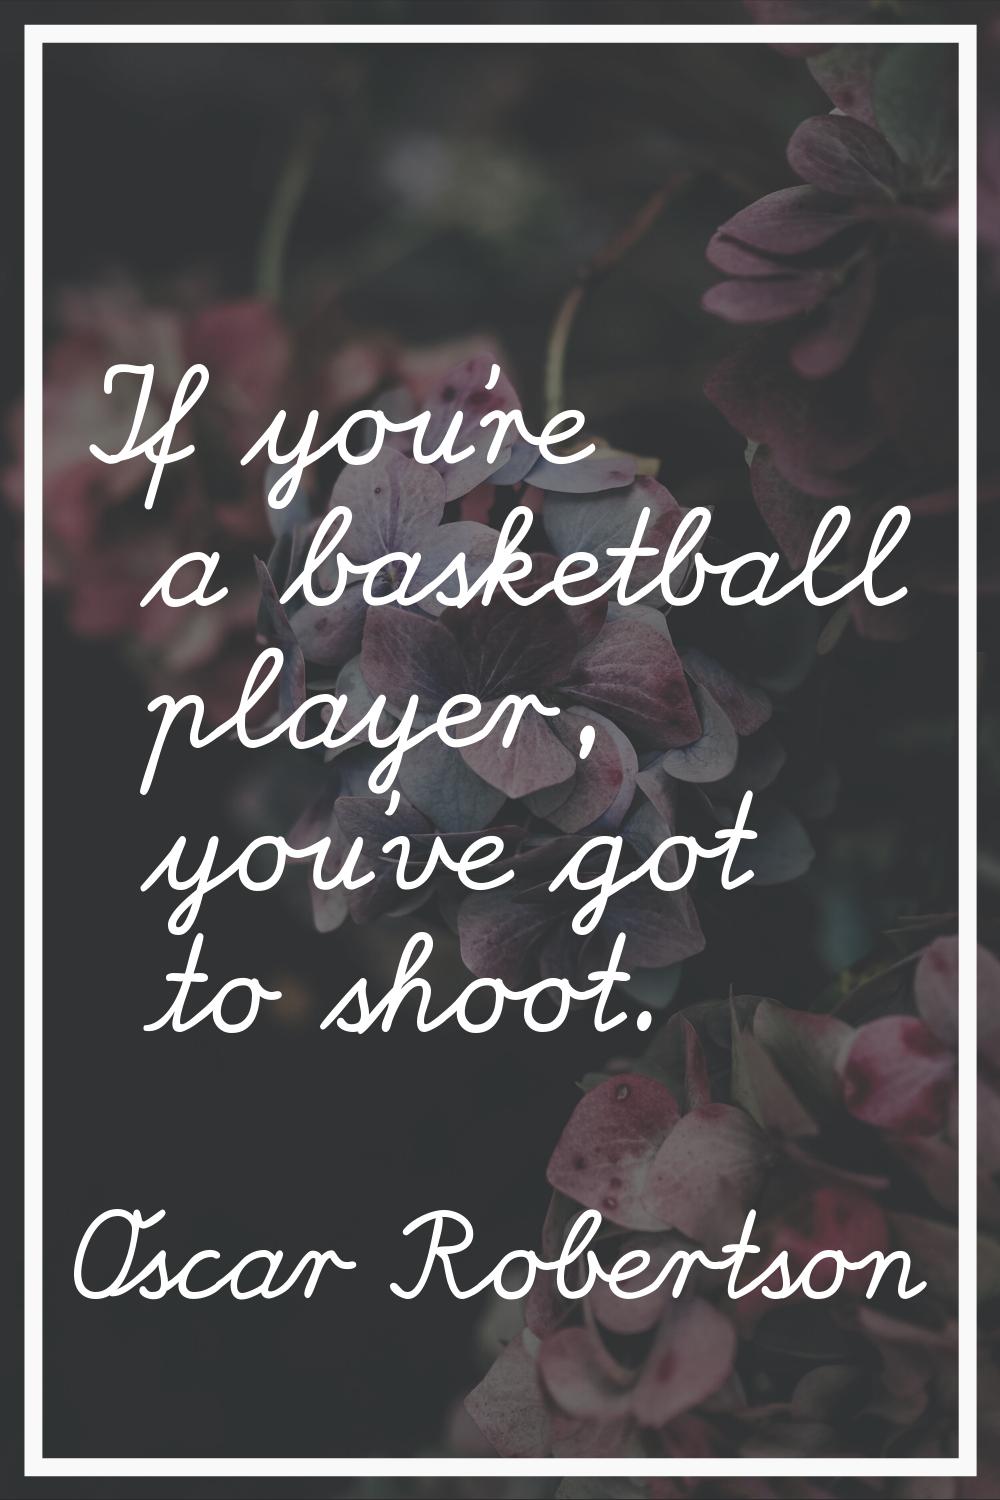 If you're a basketball player, you've got to shoot.